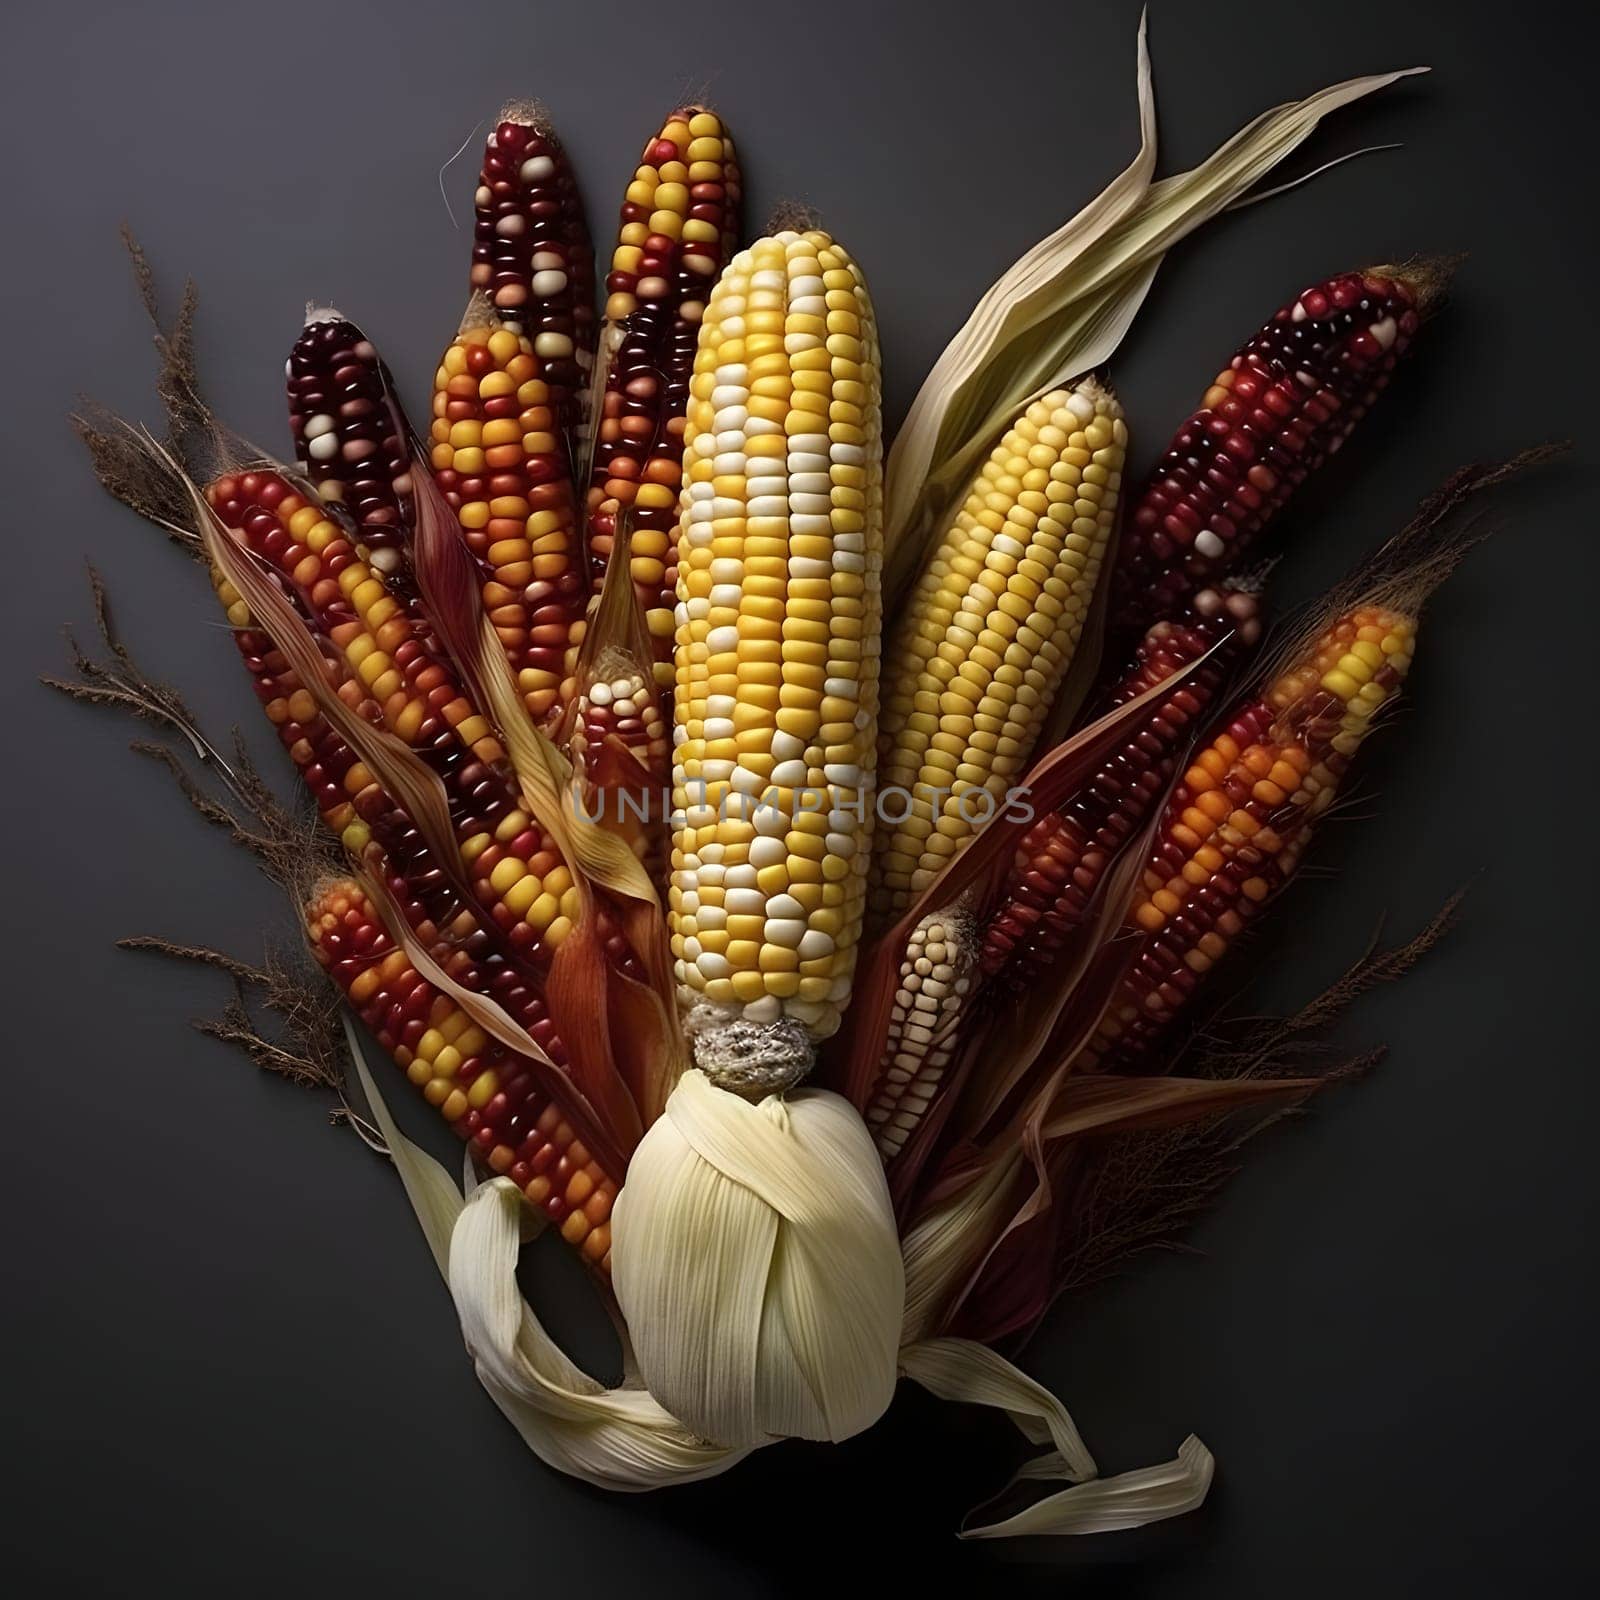 Yellow white, red and black cobs, corn arranged in a flower on a dark uniform background. Corn as a dish of thanksgiving for the harvest. An atmosphere of joy and celebration.